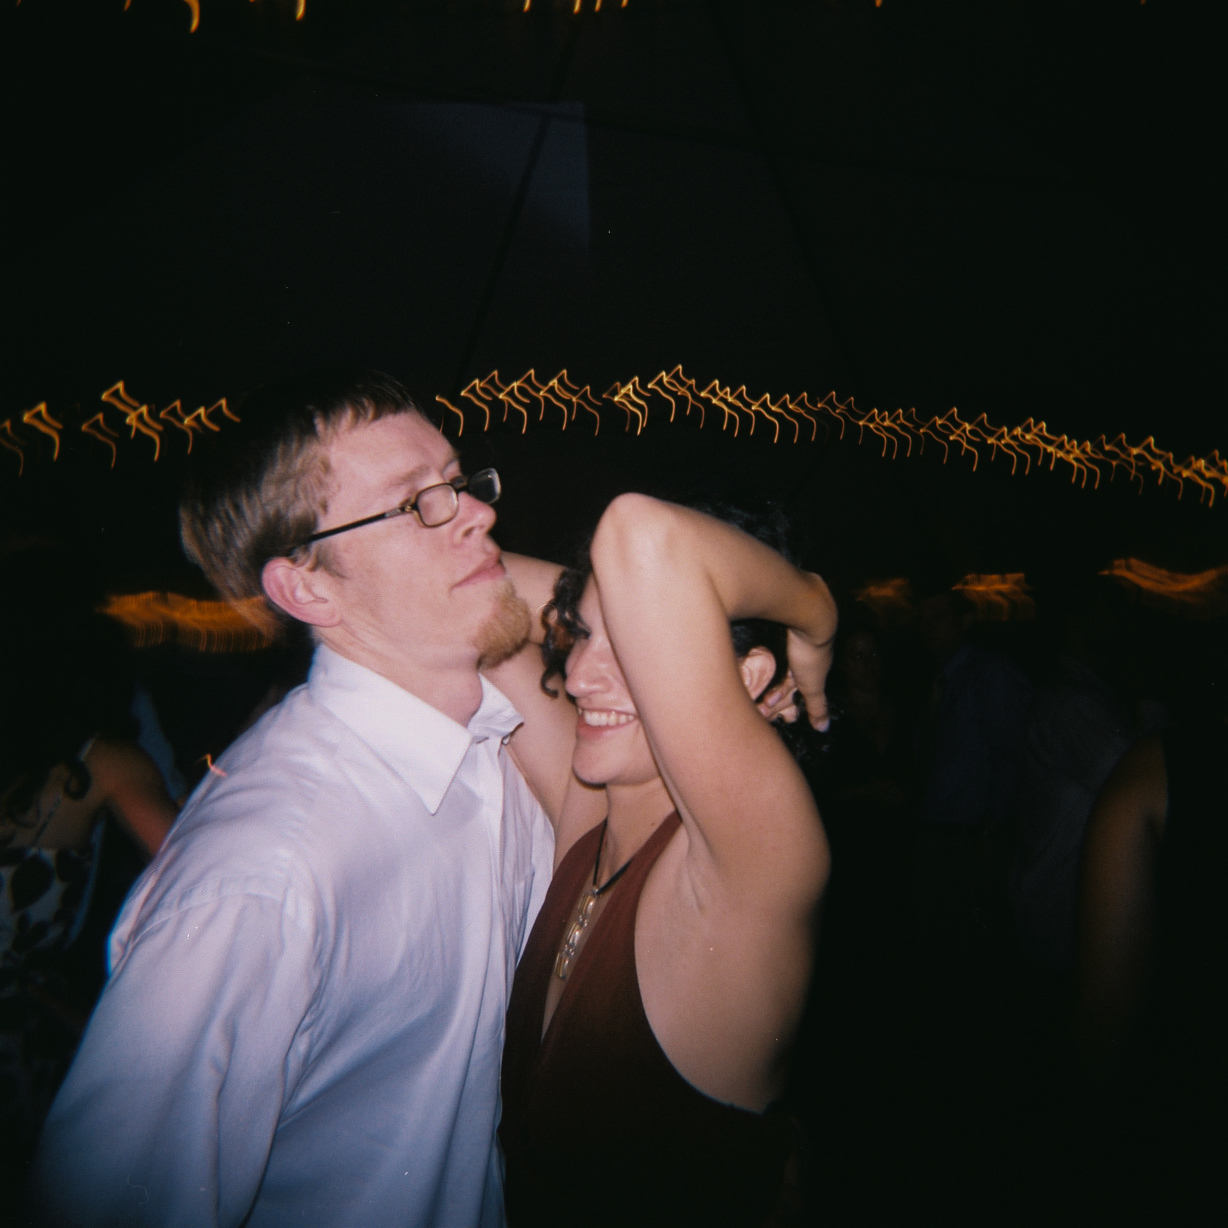 a man and woman dancing at an outdoor party